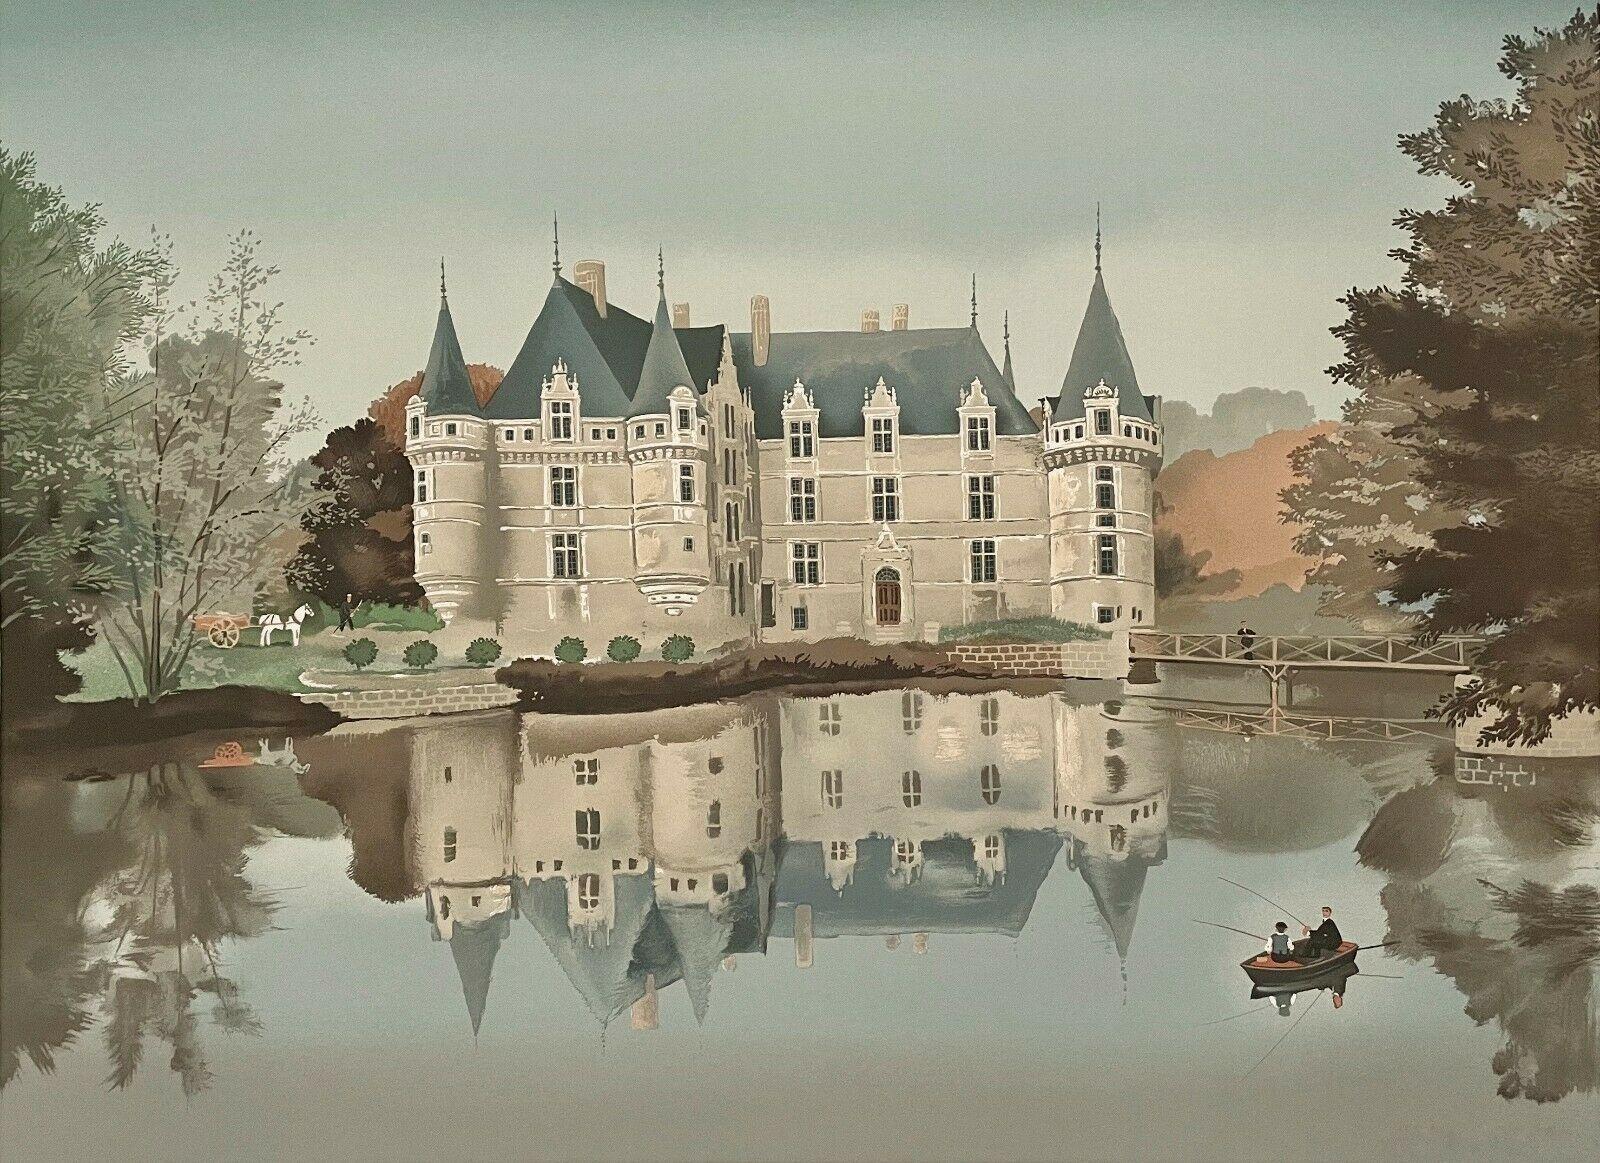 Artist: Michel Delacroix (1933)
Title: Azay le Rideau
Year: 1987
Edition: 150 Arabic Numerals on Rives paper, 150 Roman Numerals on Japon paper, and 25 APs on Rives paper
Medium: Lithograph on japon paper
Inscription: Signed & numbered in